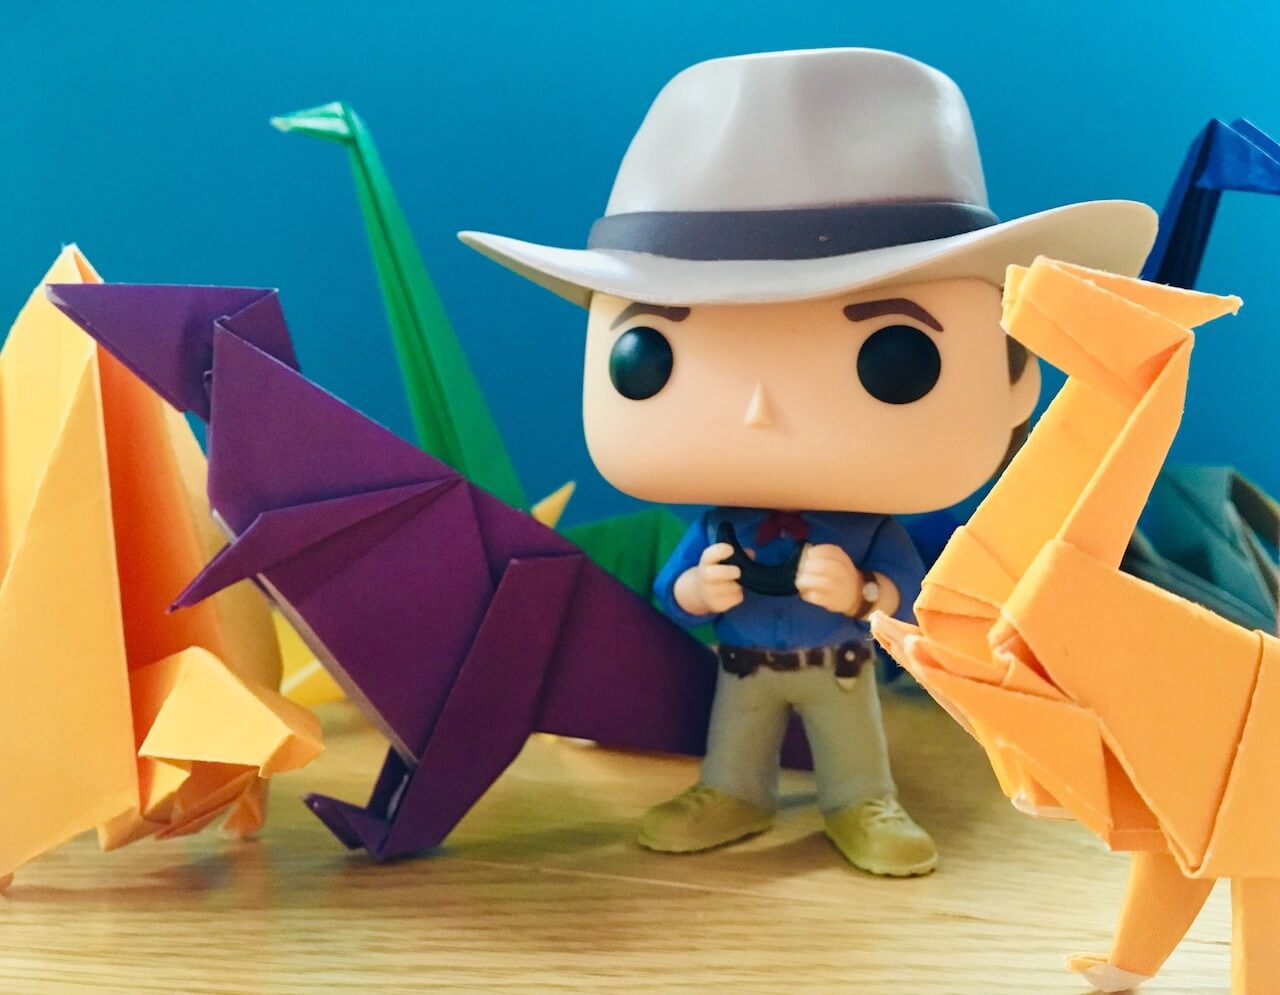 Origami dinosaurs surrounding an Alan Grant figurine from Jurassic Park.